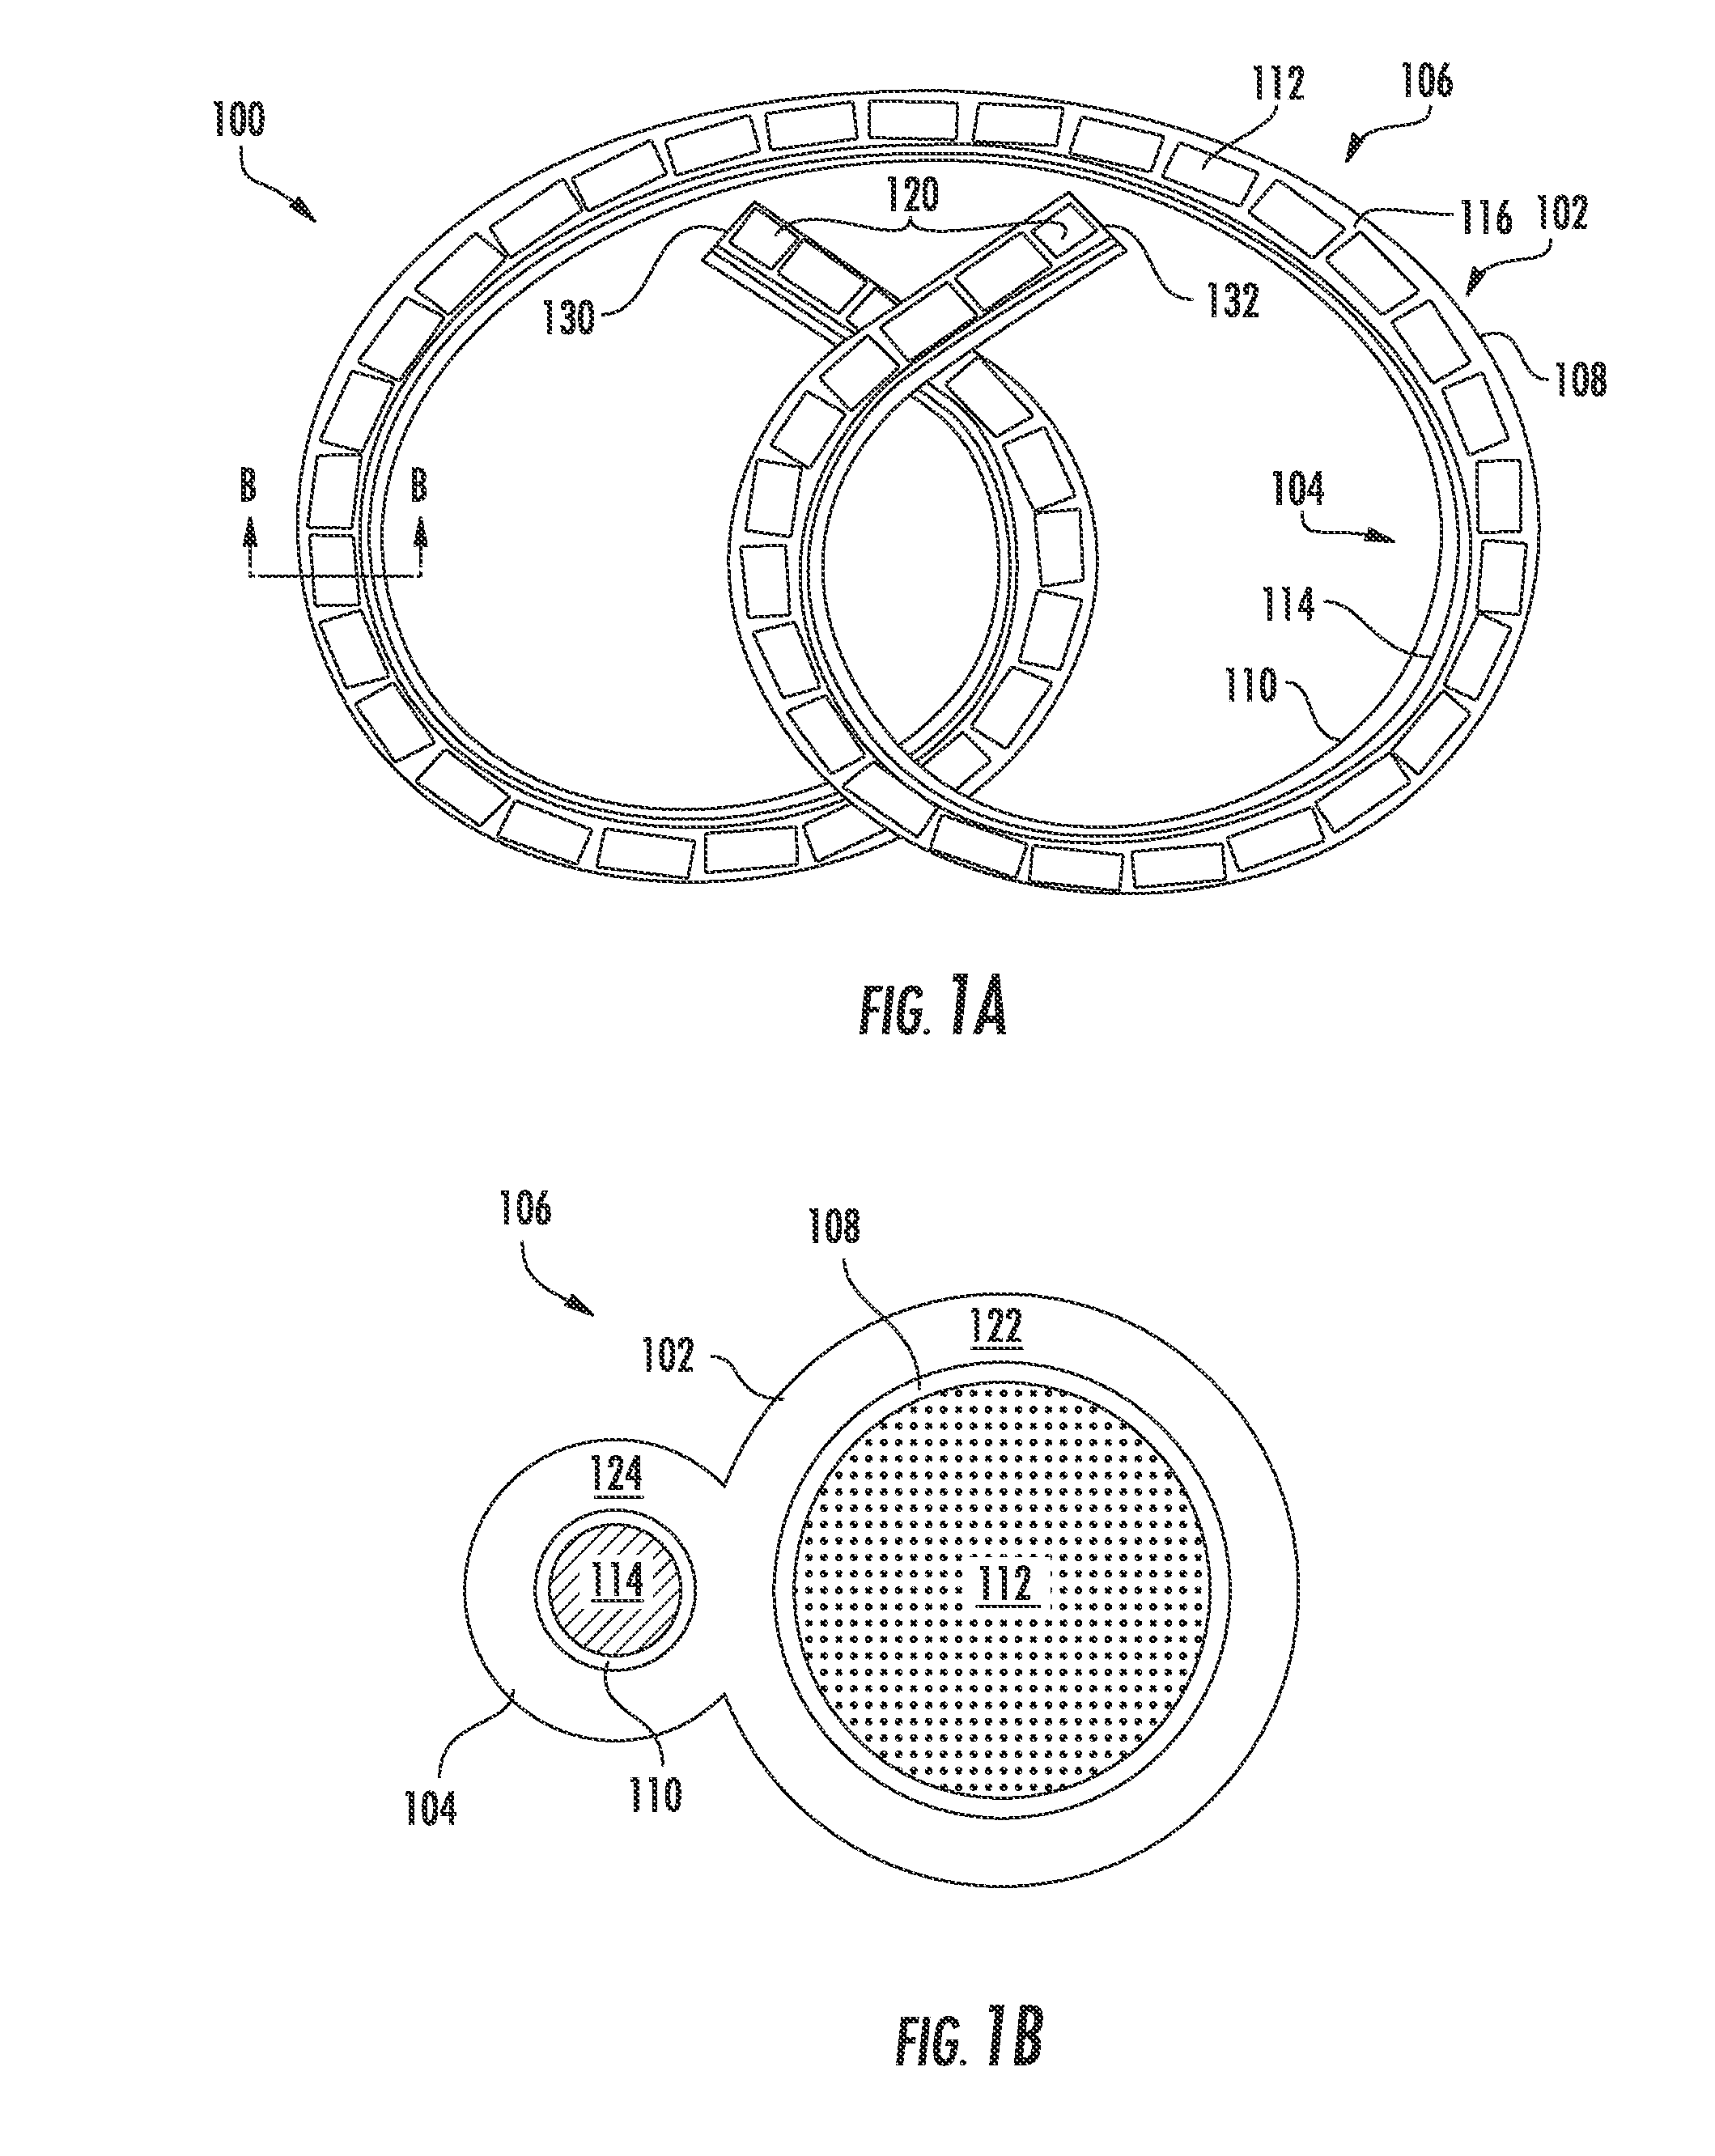 Drug delivery systems and methods for treatment of bladder cancer with gemcitabine